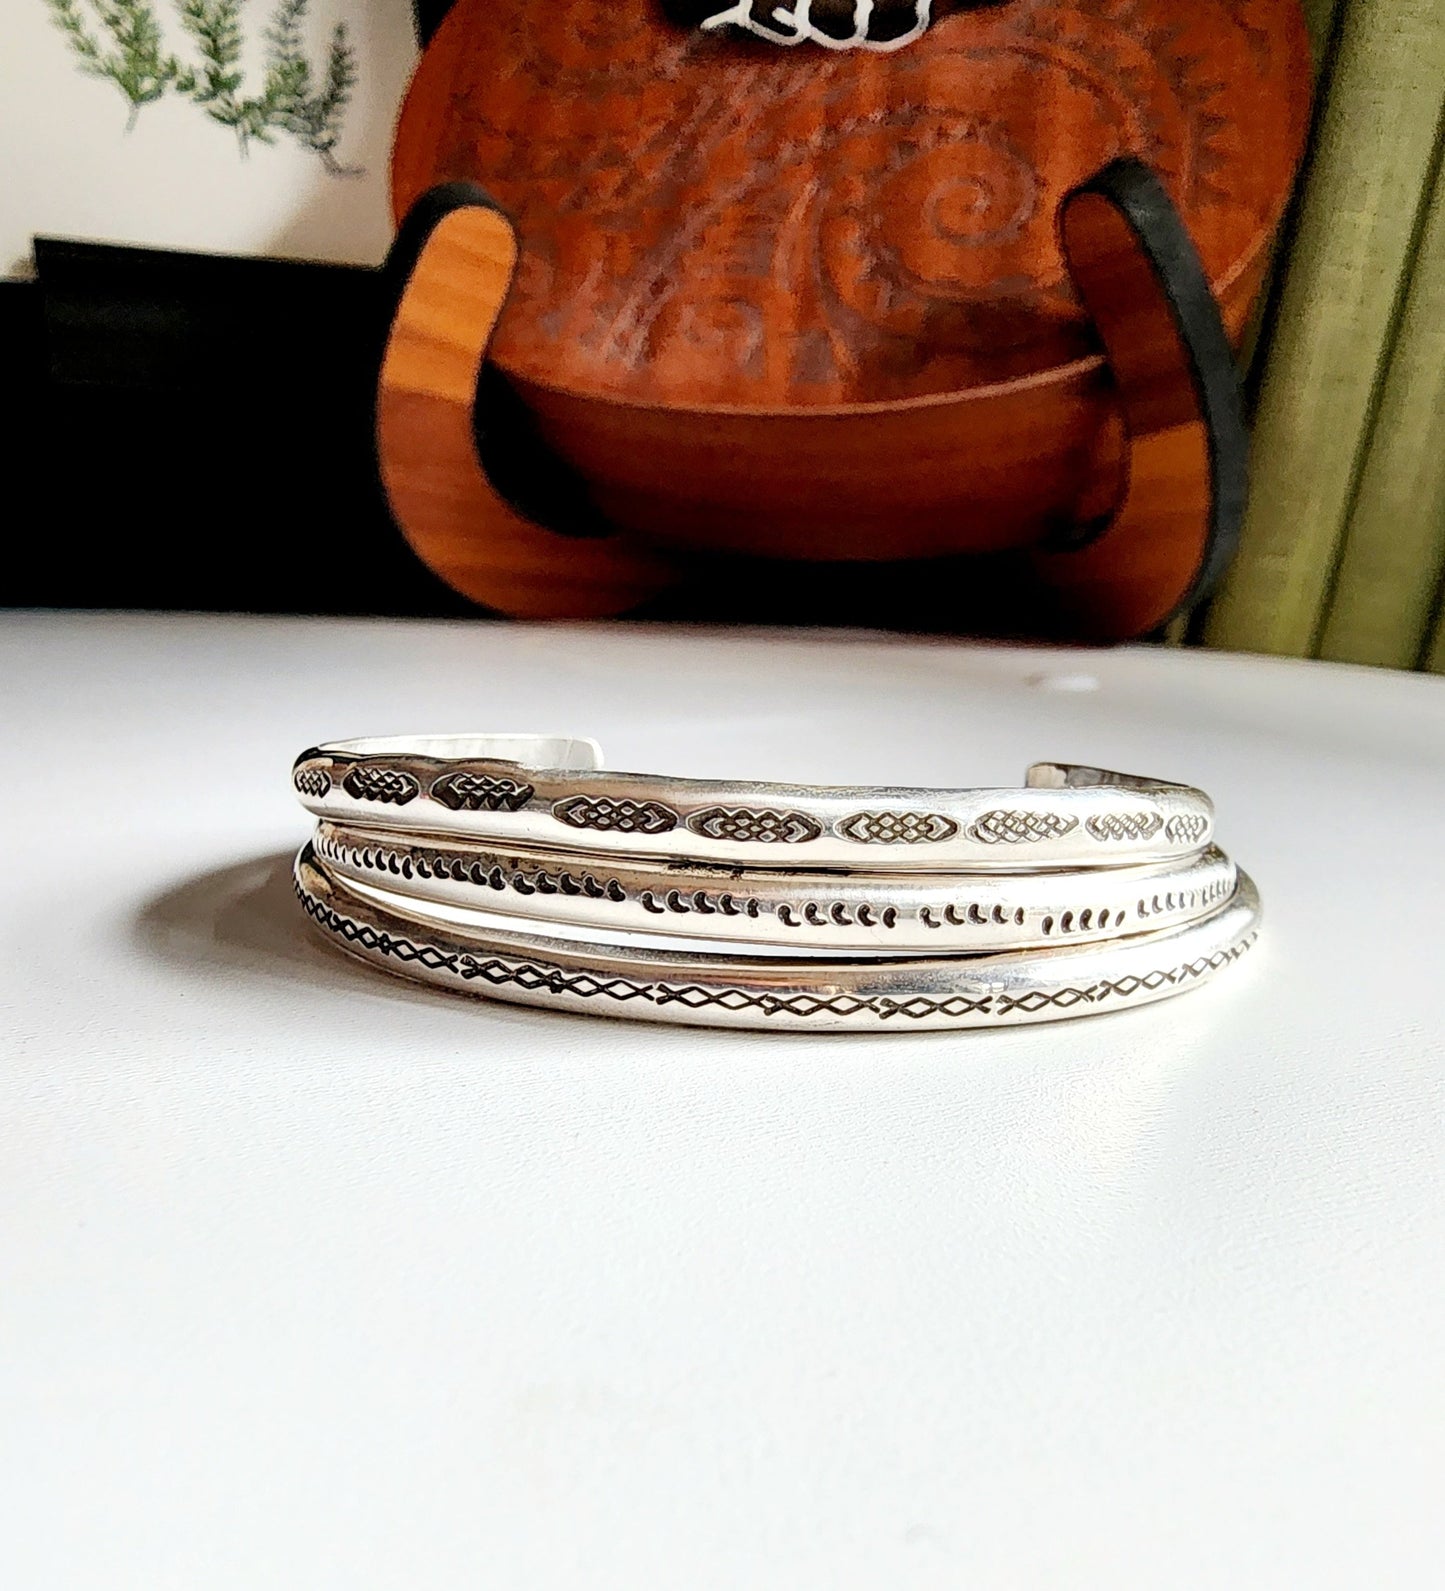 Stamped sterling silver cuff bracelet. Option one is a set of 5 small crescent moons, two is four interlocking triangles stamped continously, option 3 is four diamonds set right next to each other stamped continously.